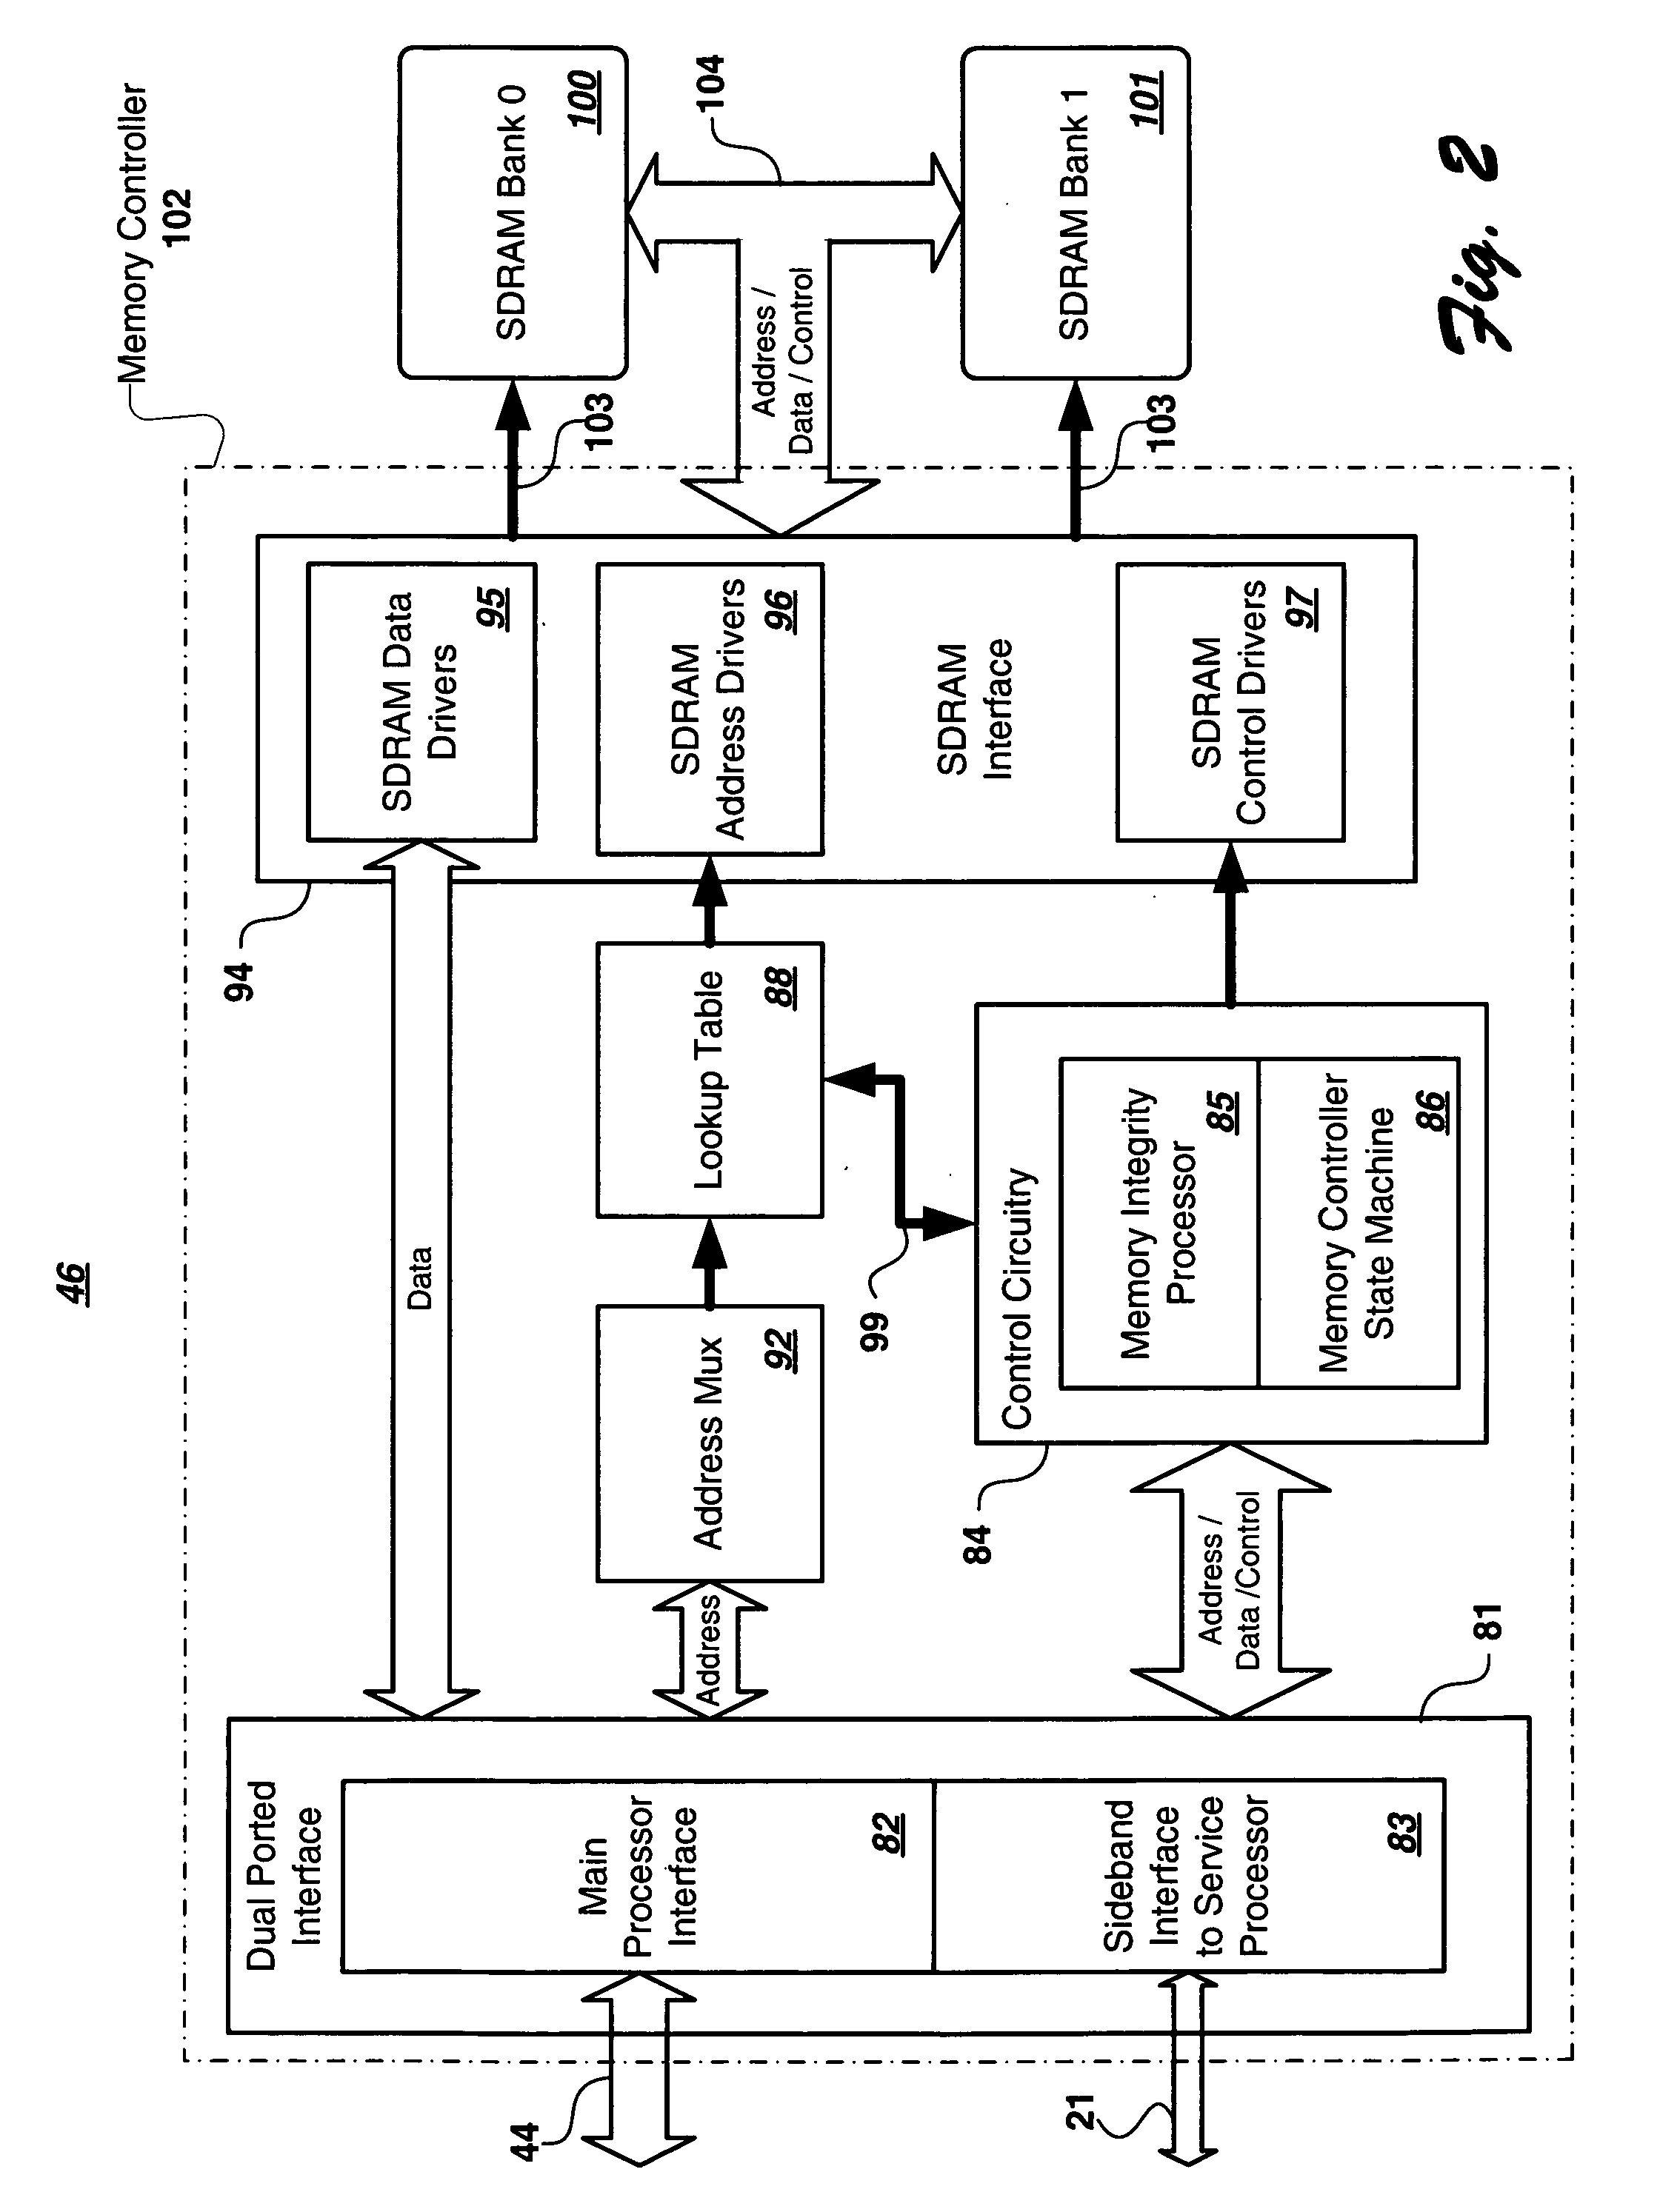 Real-time memory verification in a high-availability system